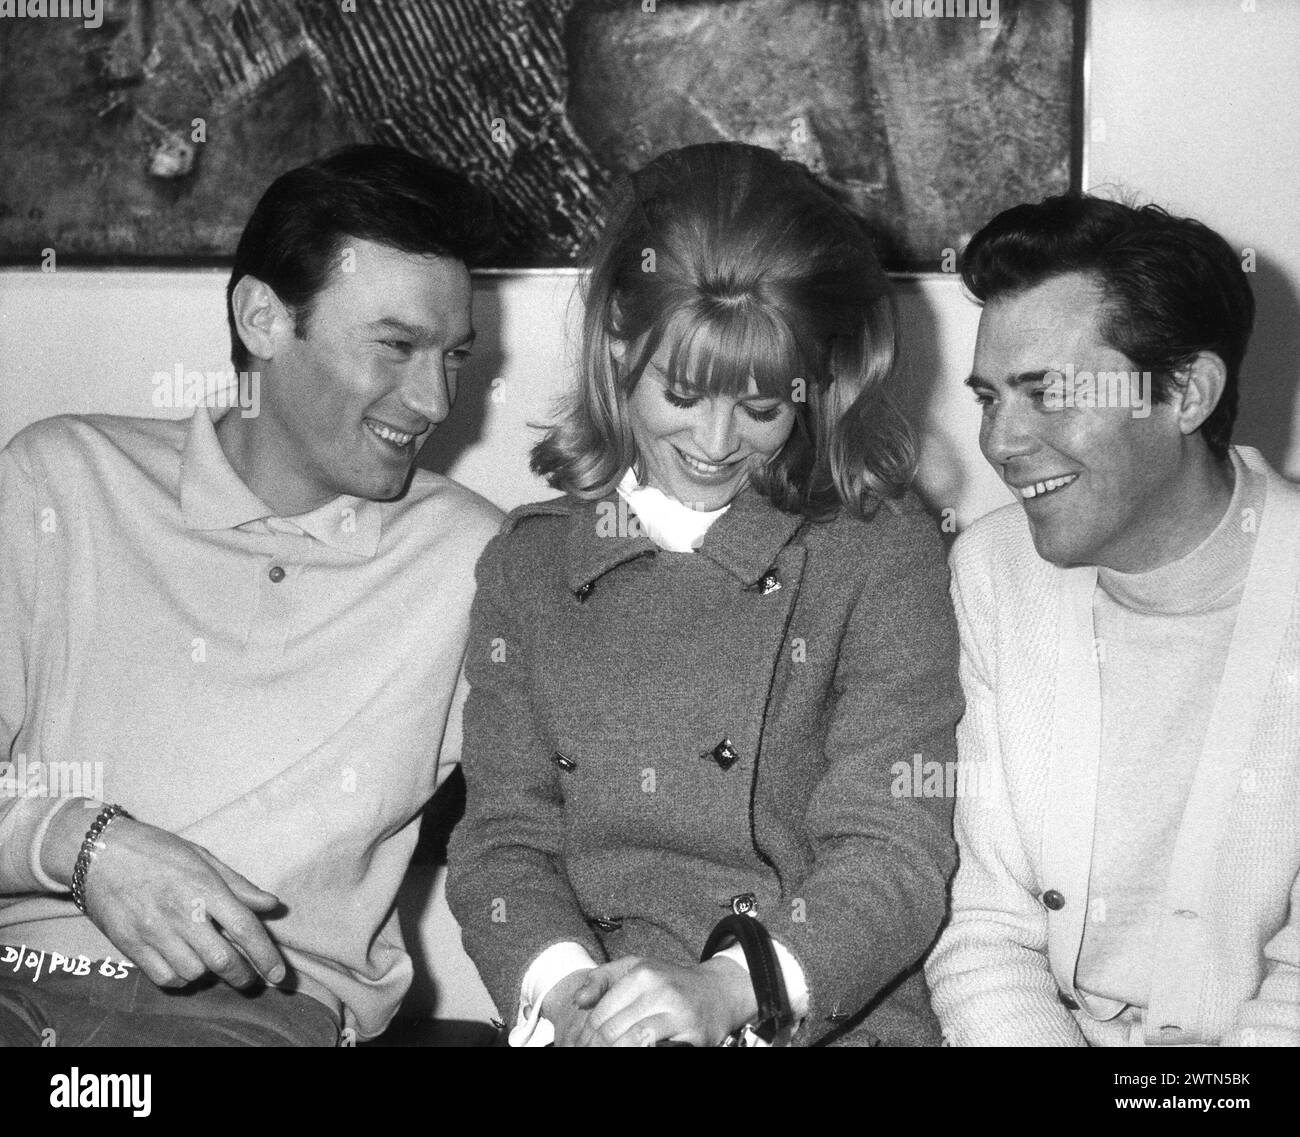 A candid photo of British Actress JULIE CHRISTIE with LAURENCE HARVEY and DIRK BOGARDE on the set of DARLING 1965  Director JOHN SCHLESINGER  Screenplay FREDERIC RAPHAEL Costume Design JULIE HARRIS Music JOHN DANKWORTH Vic-Appia Films / Anglo Amalgamated Stock Photo